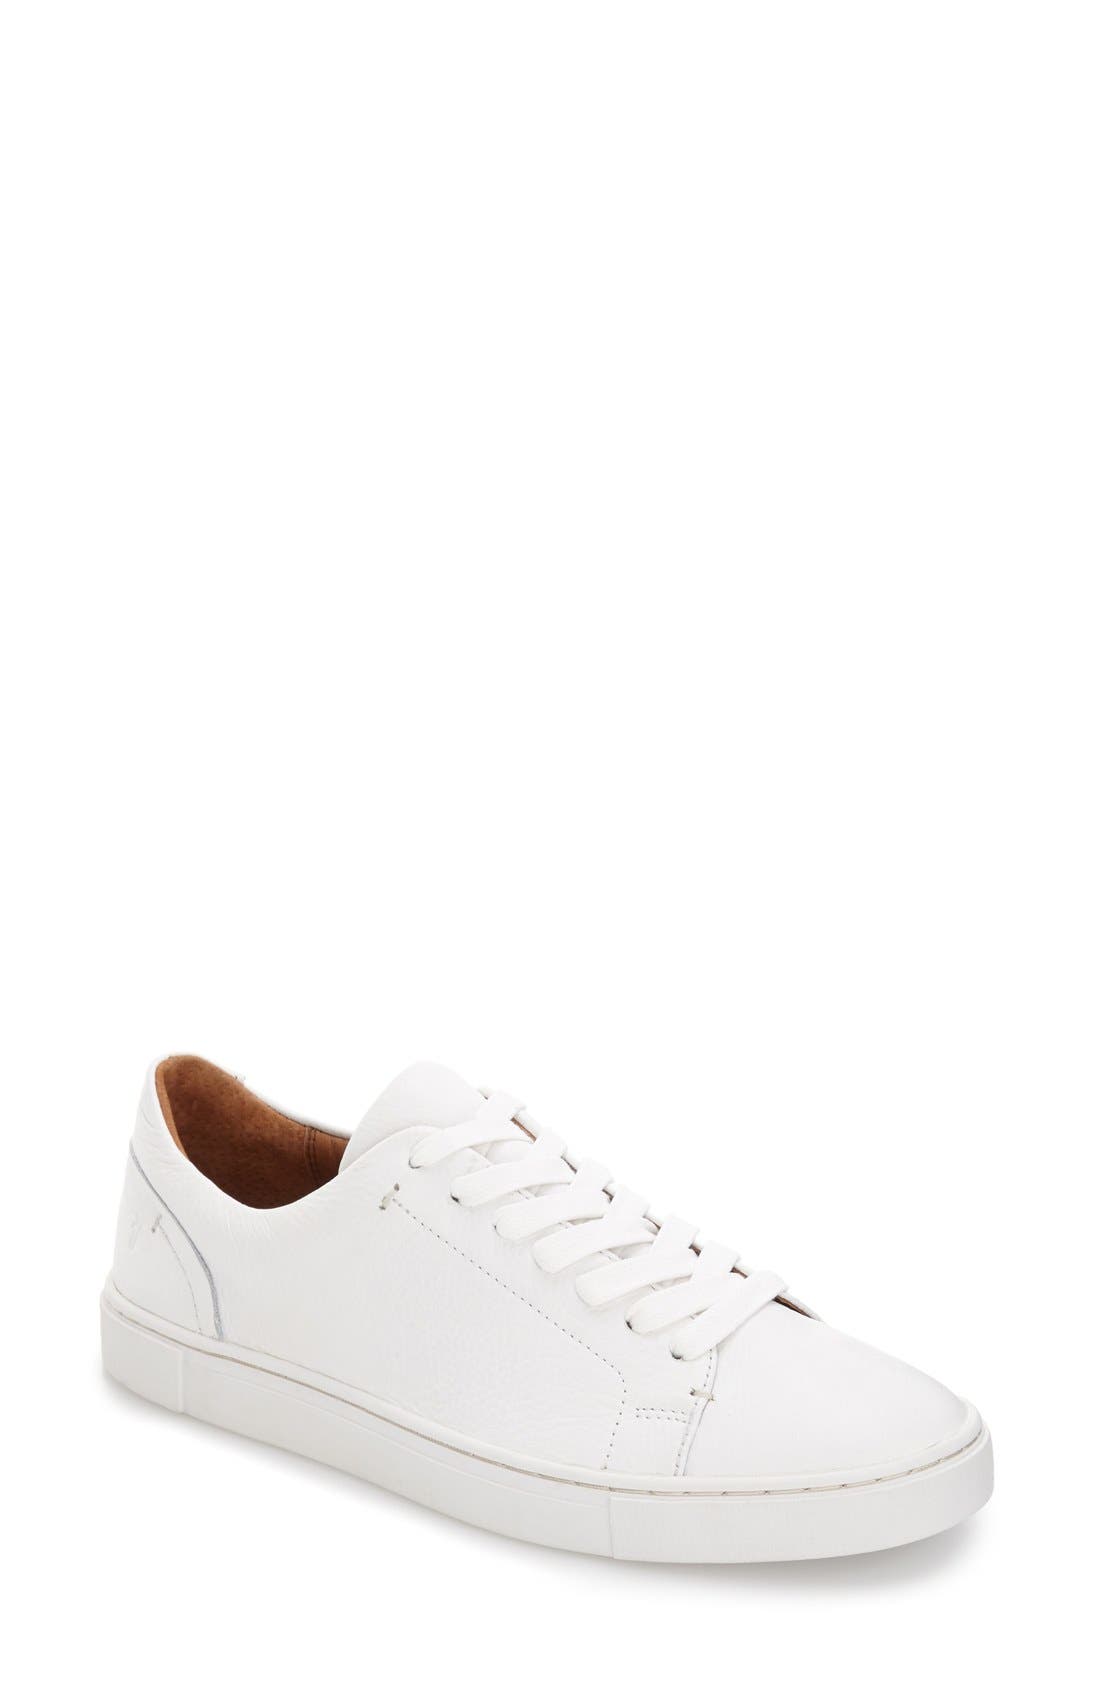 womens white sneakers leather